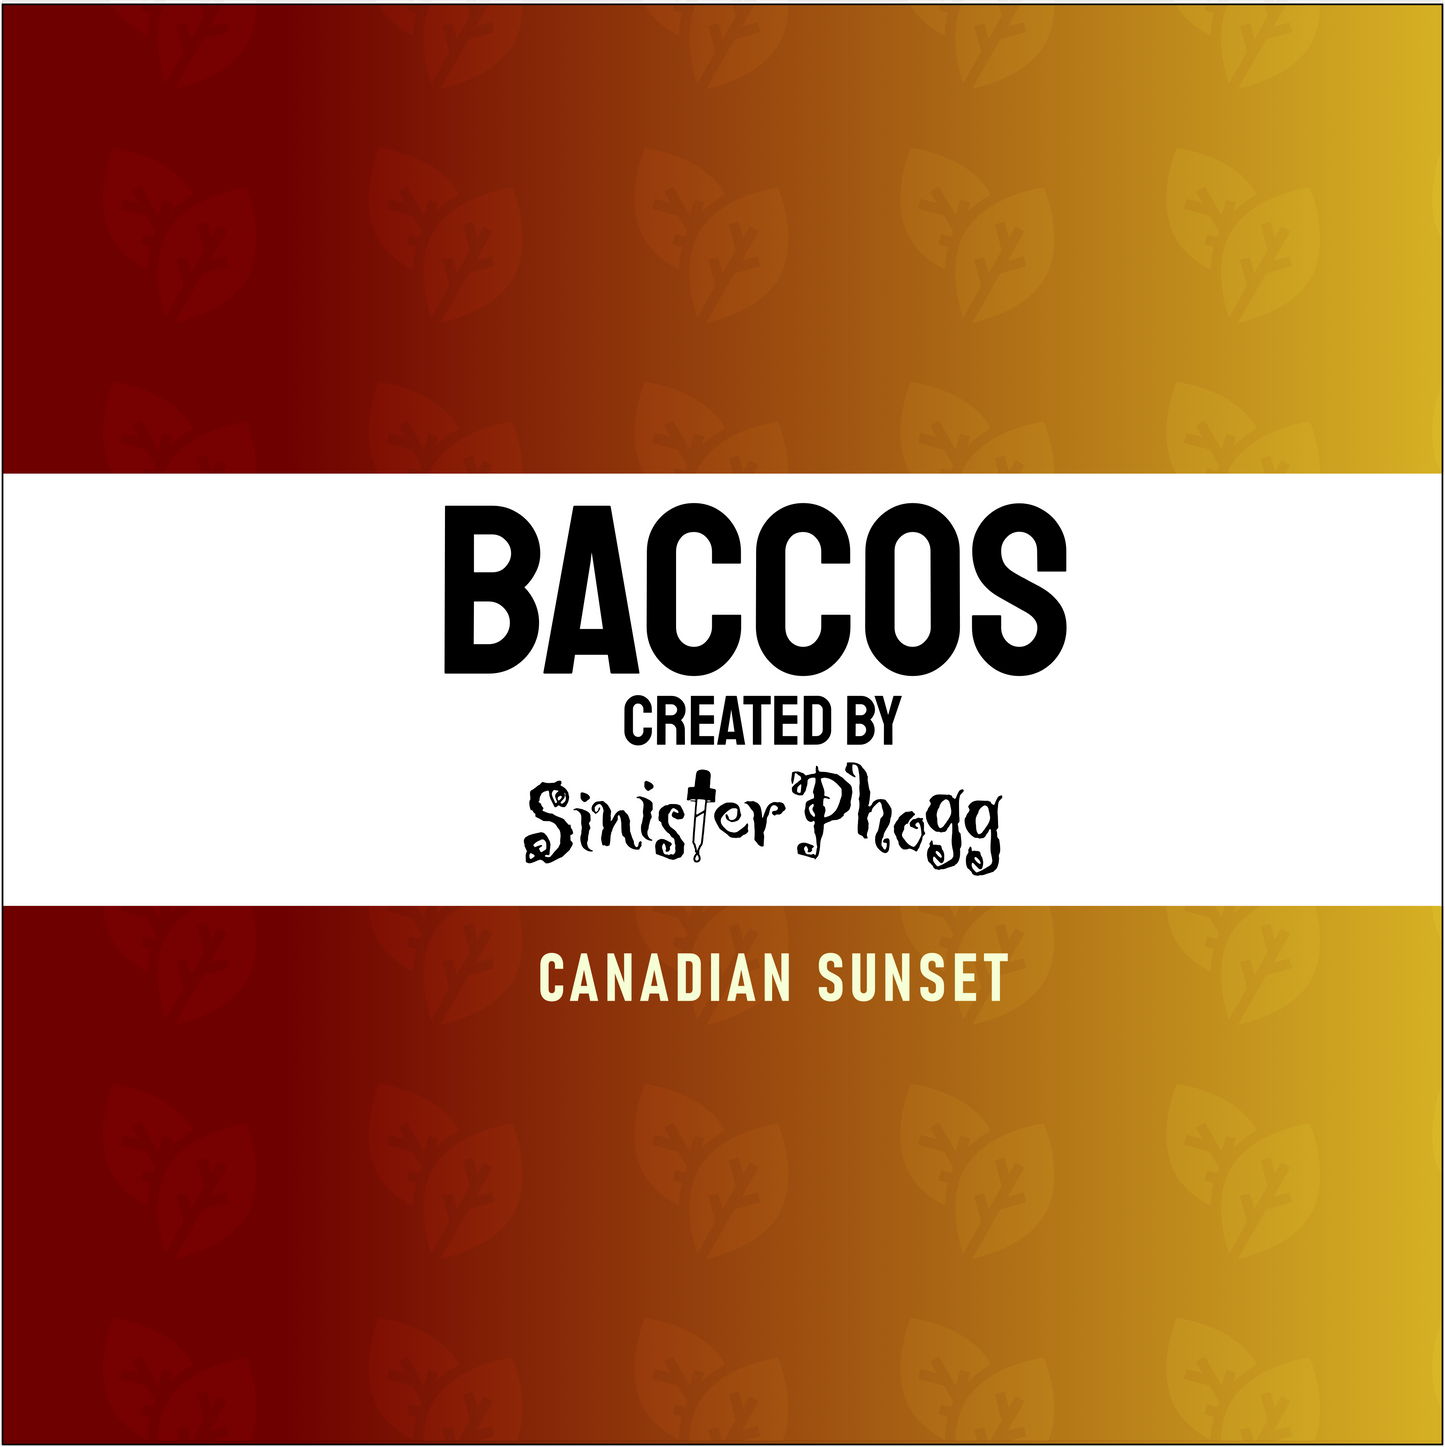 Canadian Sunset - BACCOS by Sinister Phogg